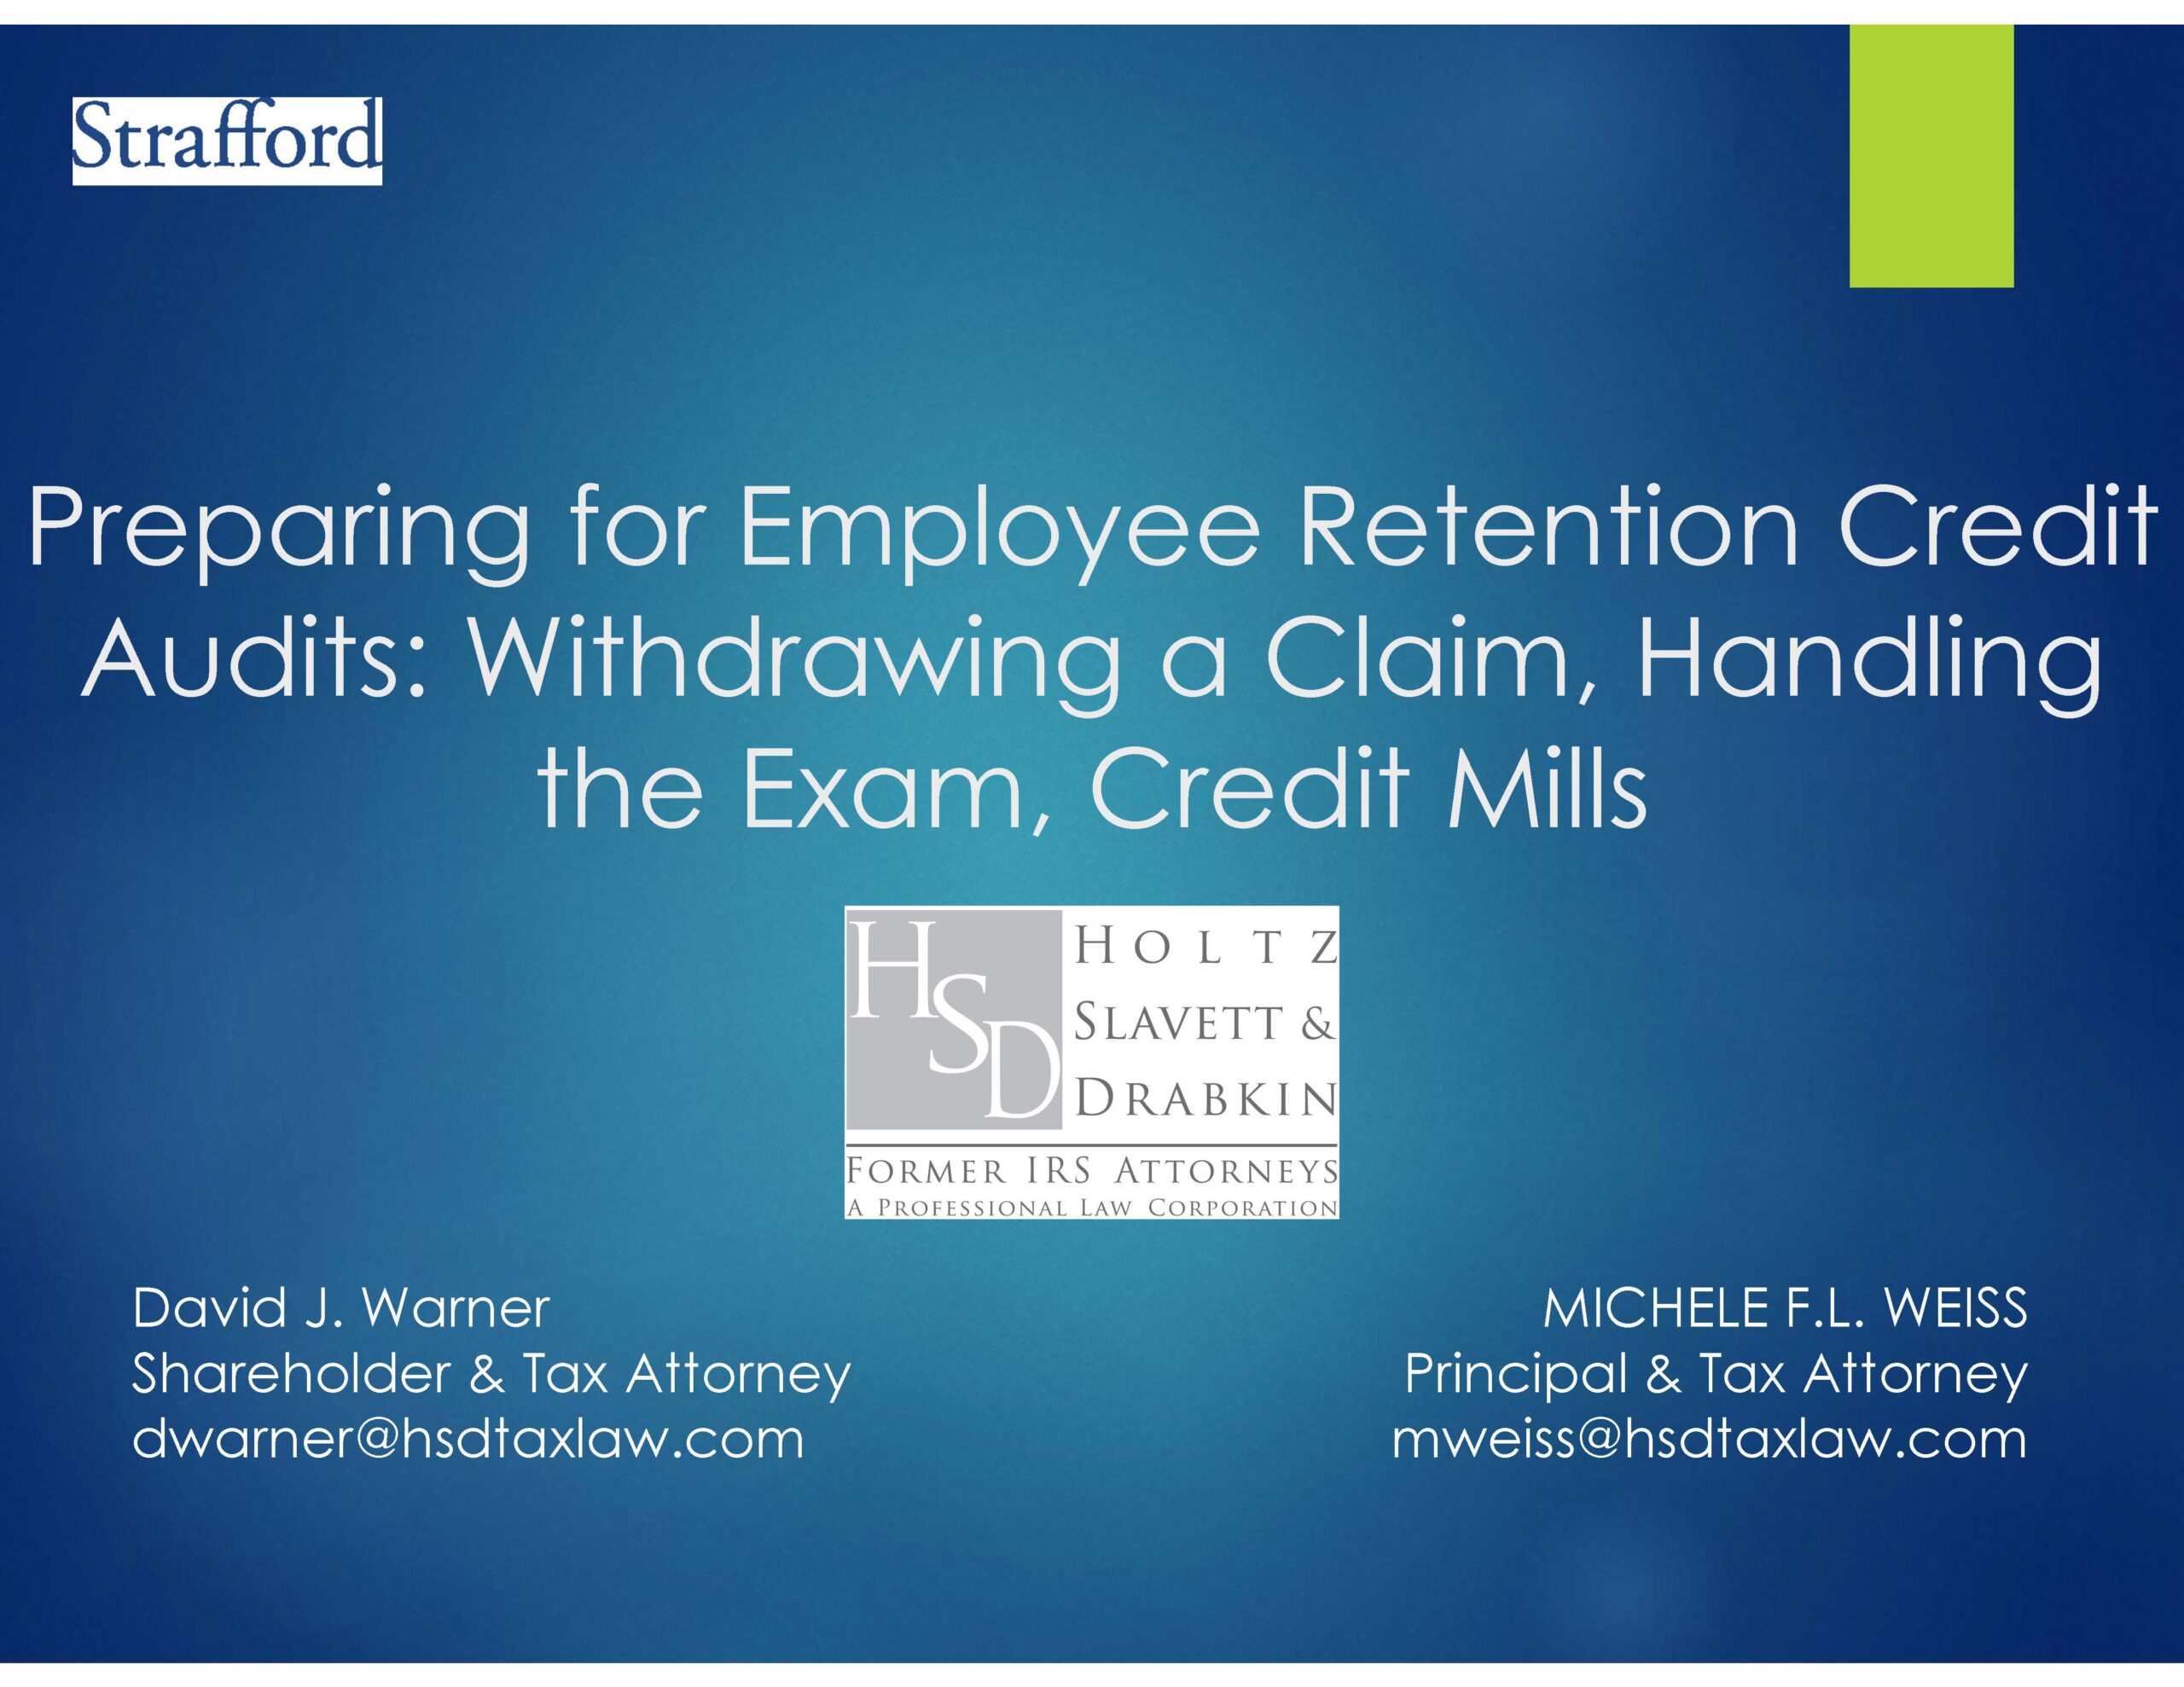 David J. Warner and Michele Weiss Analyze Strategies for IRS Audits of Employee Retention Credit in Strafford Webinar